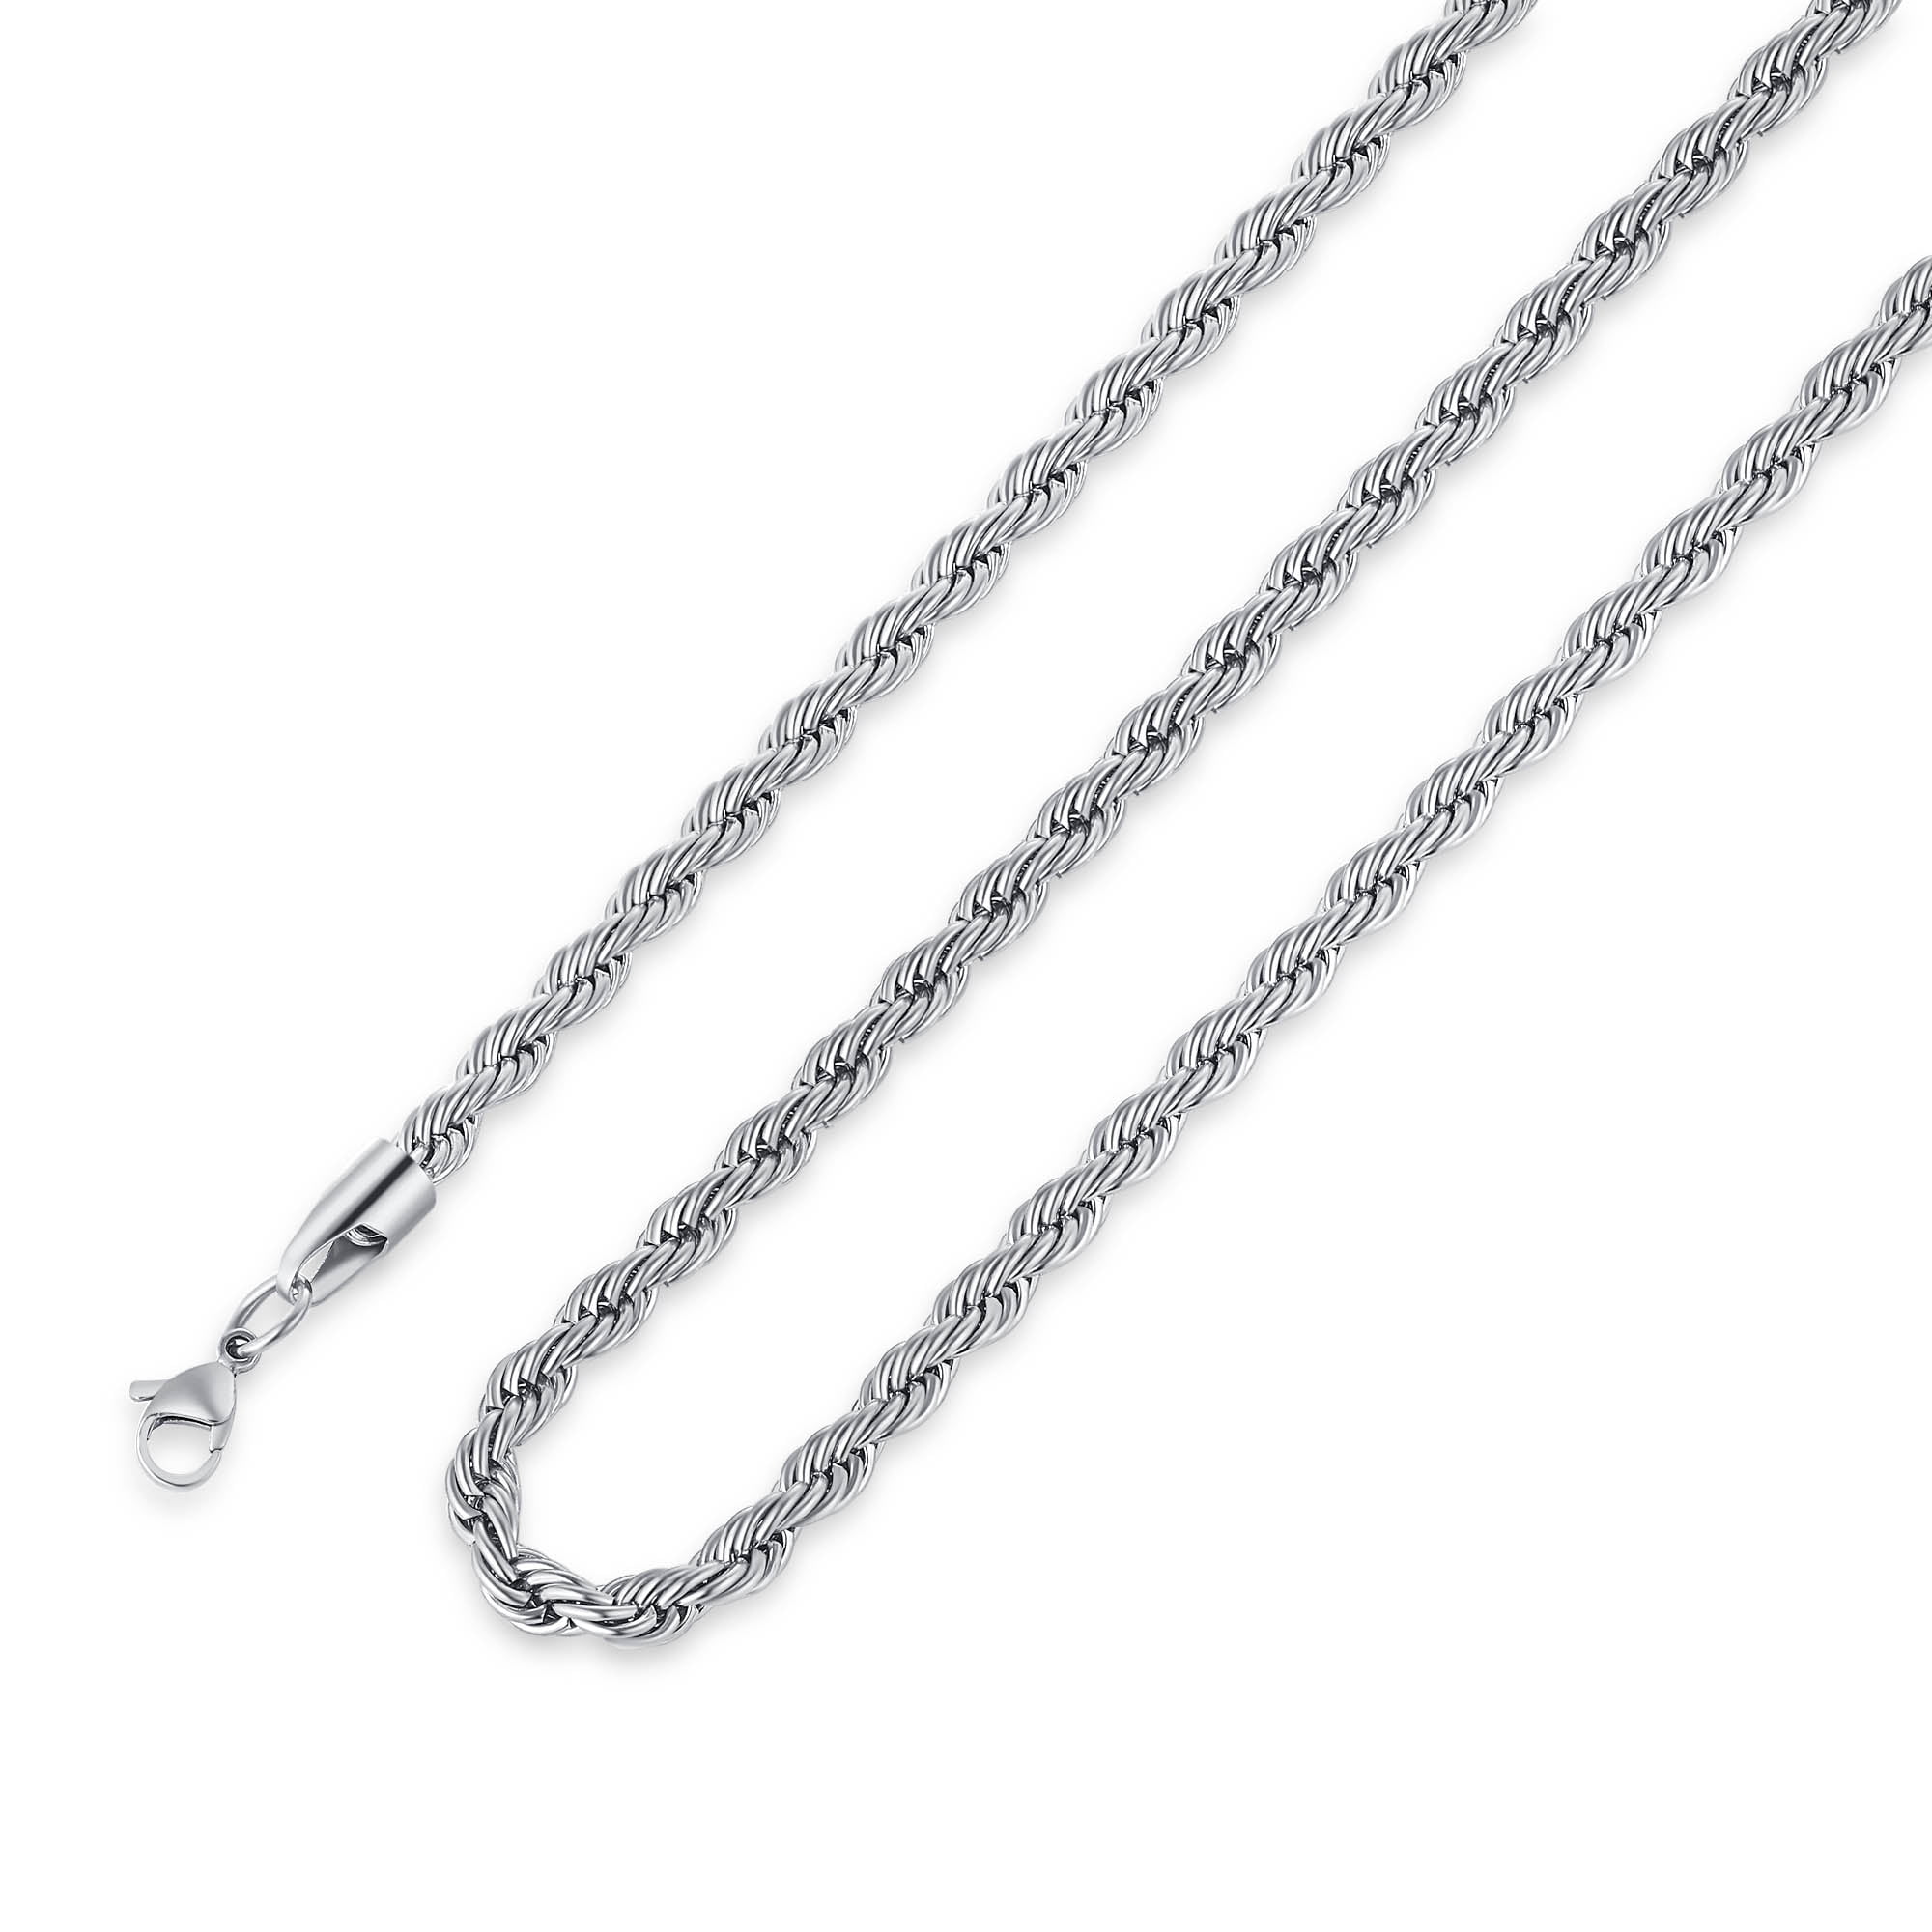 Silver Tone Men/Women's 2-4mm 18-26'' Rope Chain Stainless Steel Necklace Gift 